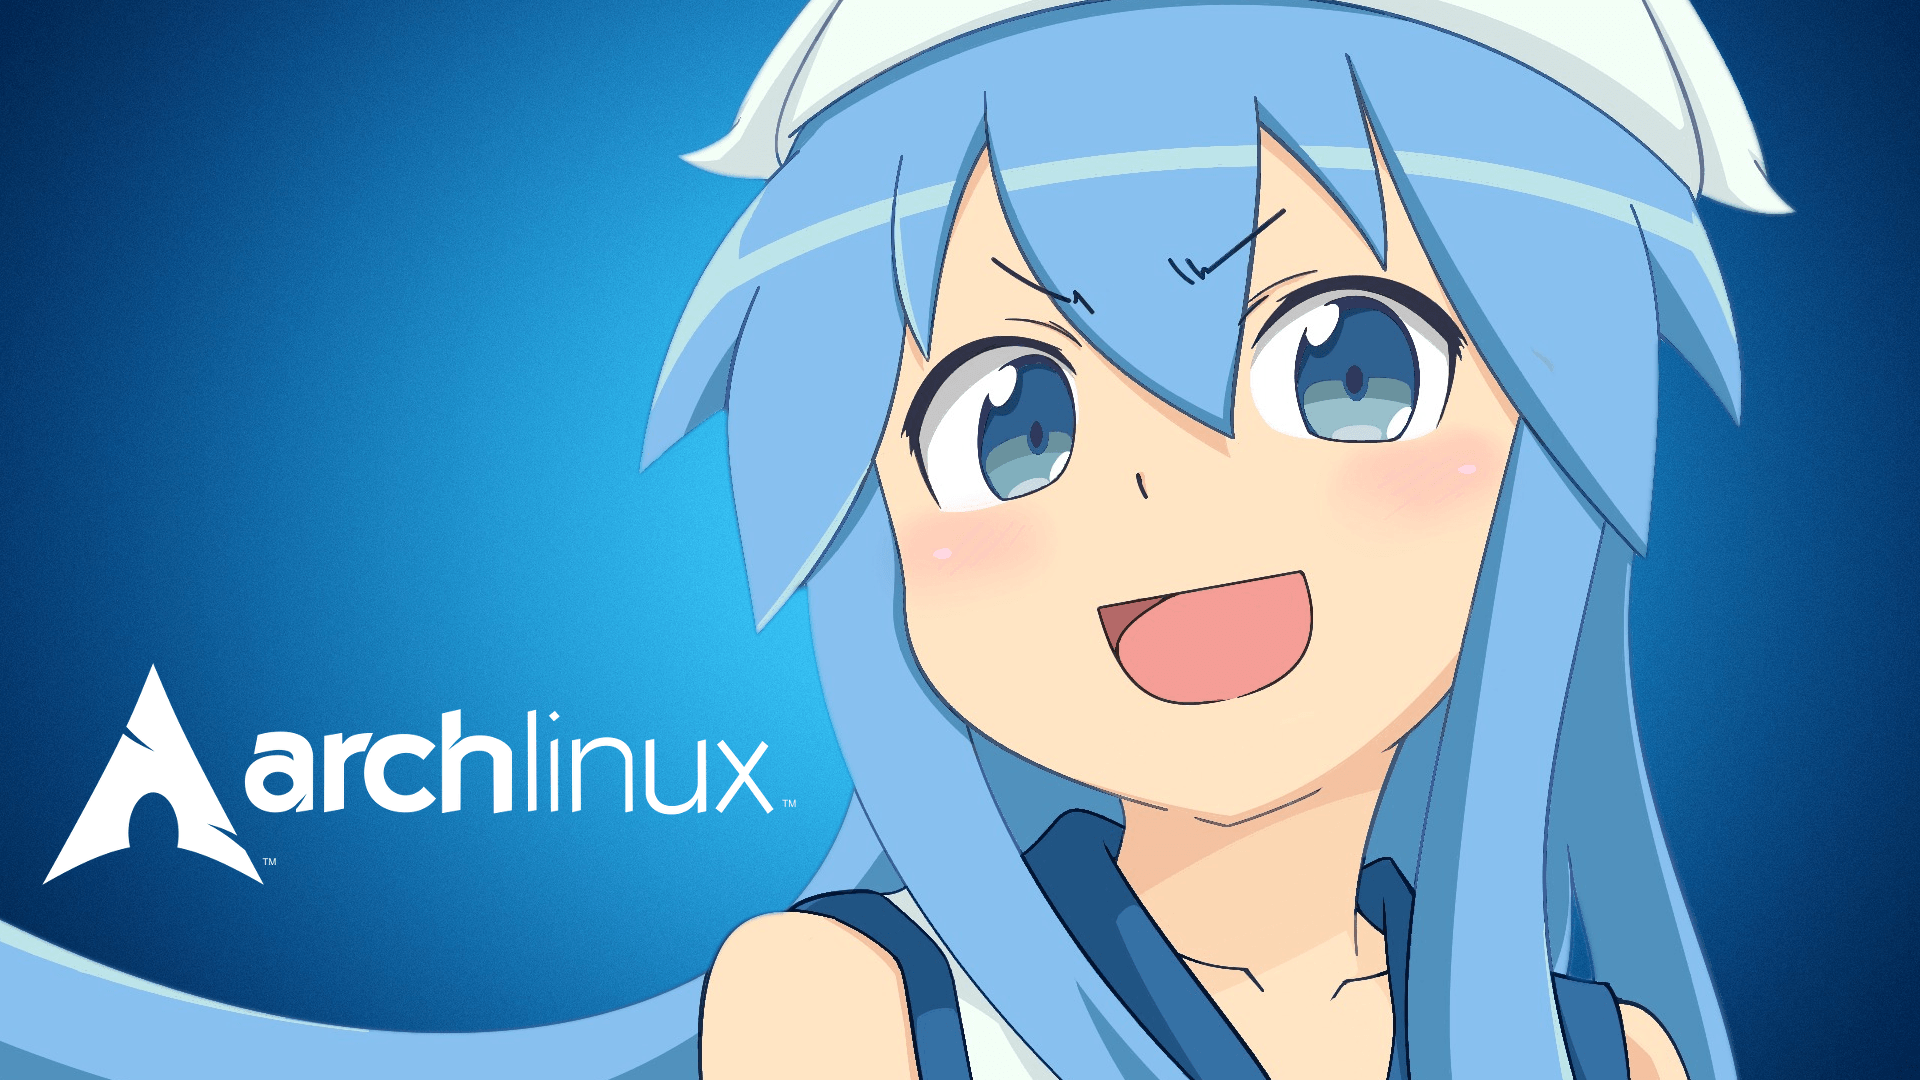 Linux Anime Wallpapers